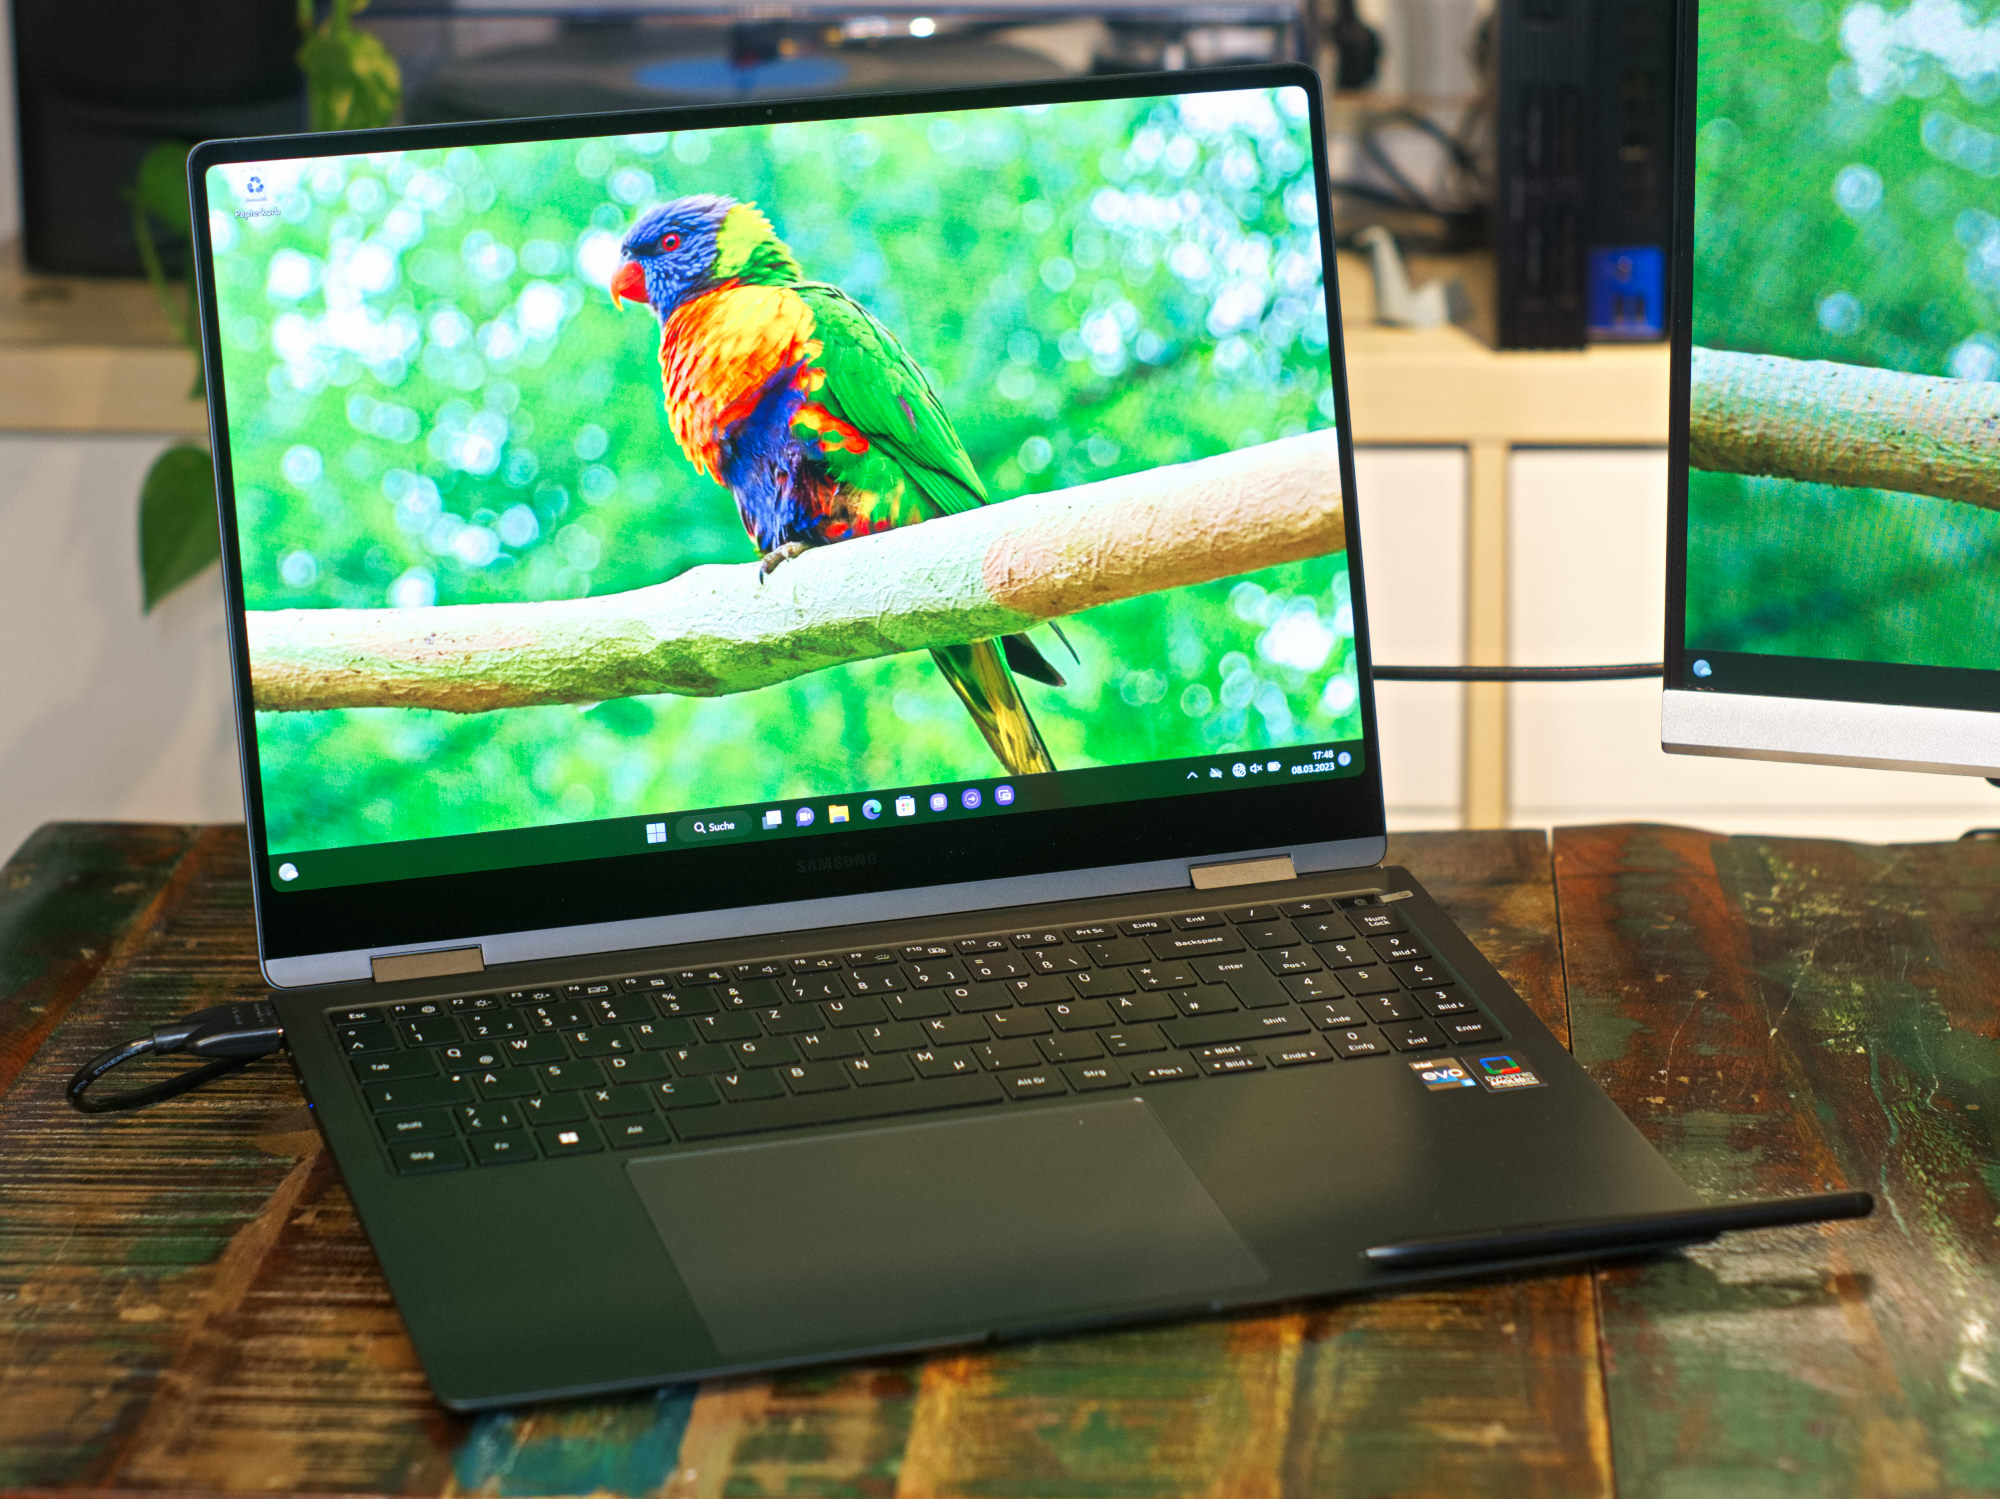 Galaxy Book 3 Series Proves Samsung's Pro Laptops Are Leveling Up - CNET